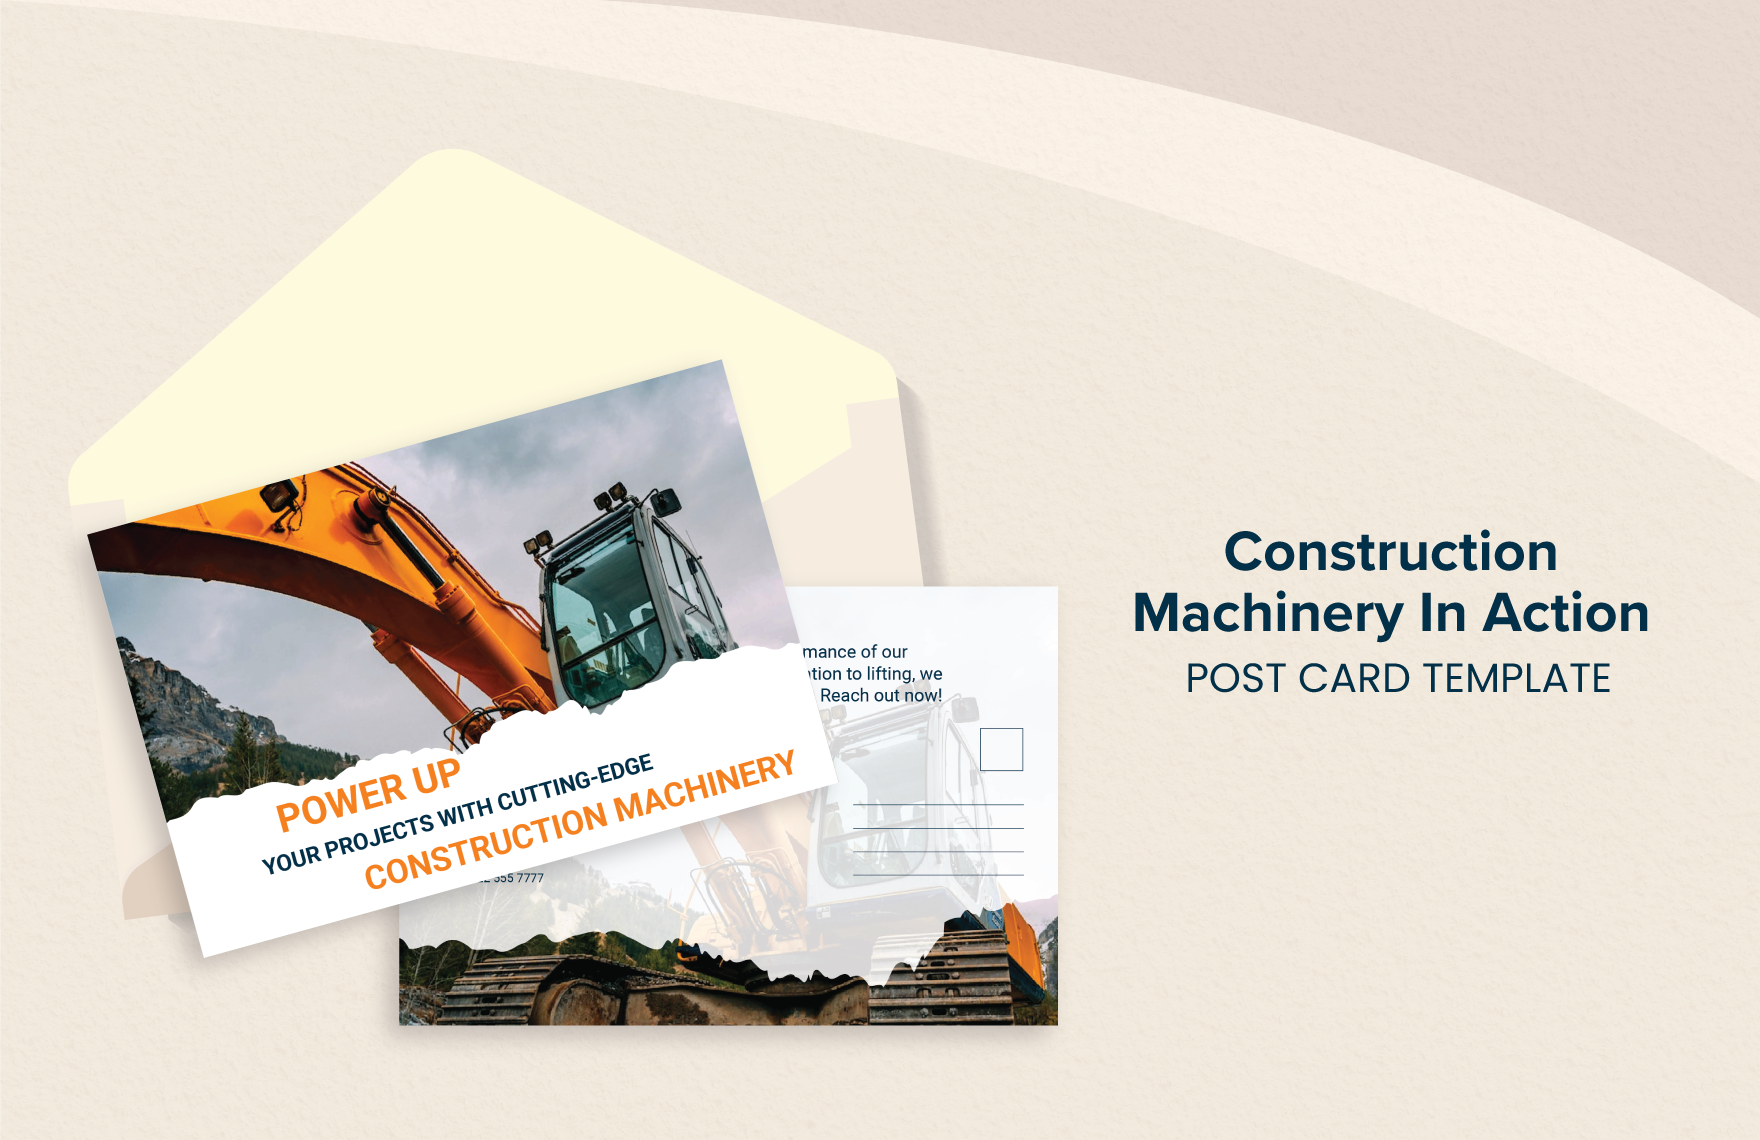 Construction Machinery In Action Postcard Template